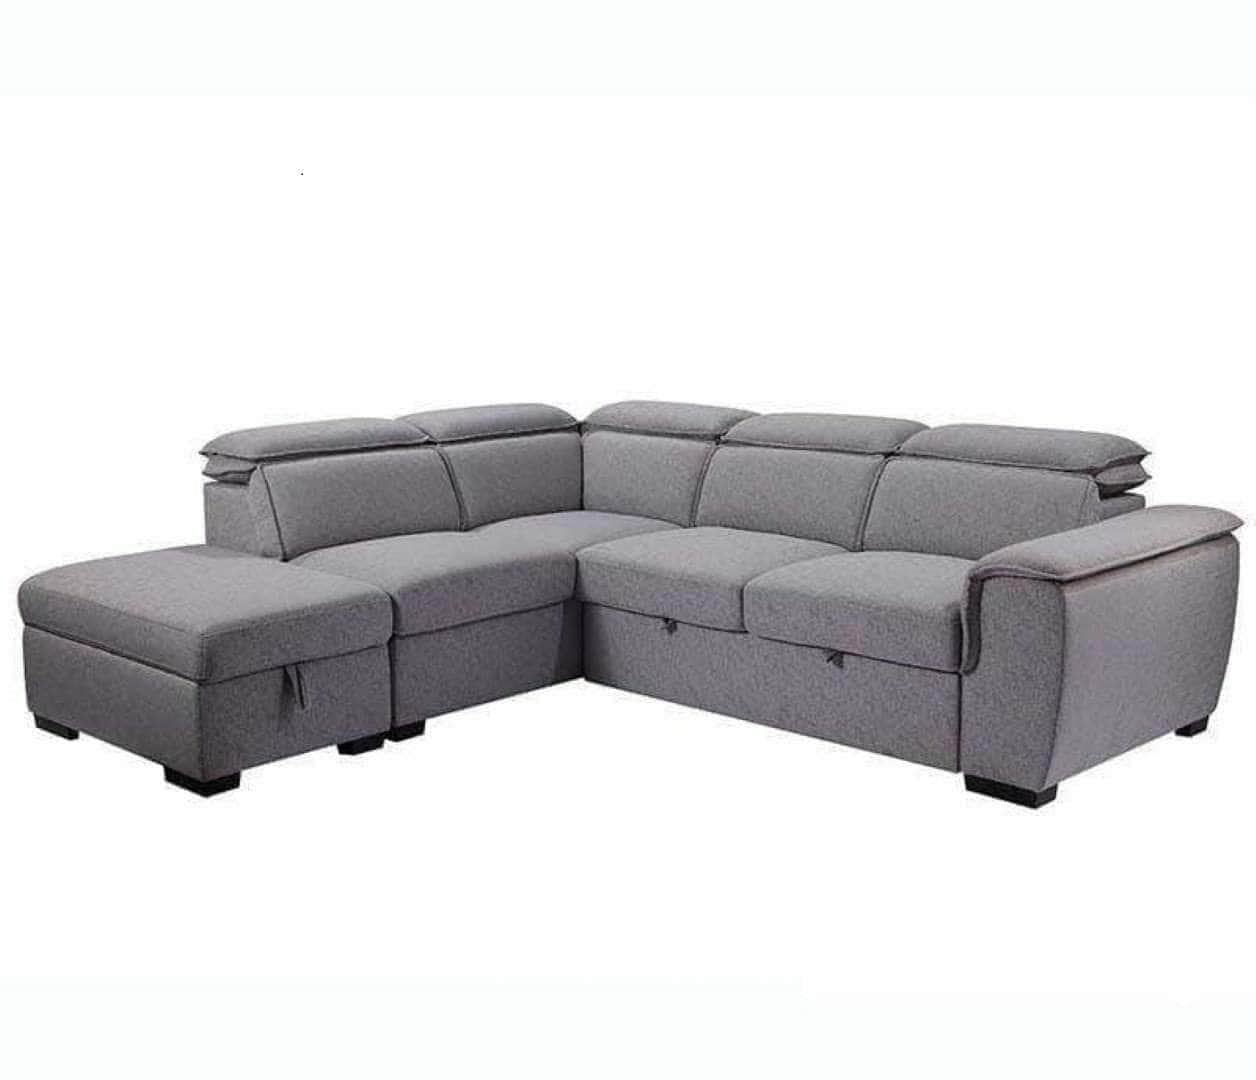 Urban Cali Sleeper Sectional Left Facing Chaise Gerardo Sleeper Sectional Sofa Bed with Storage Ottoman